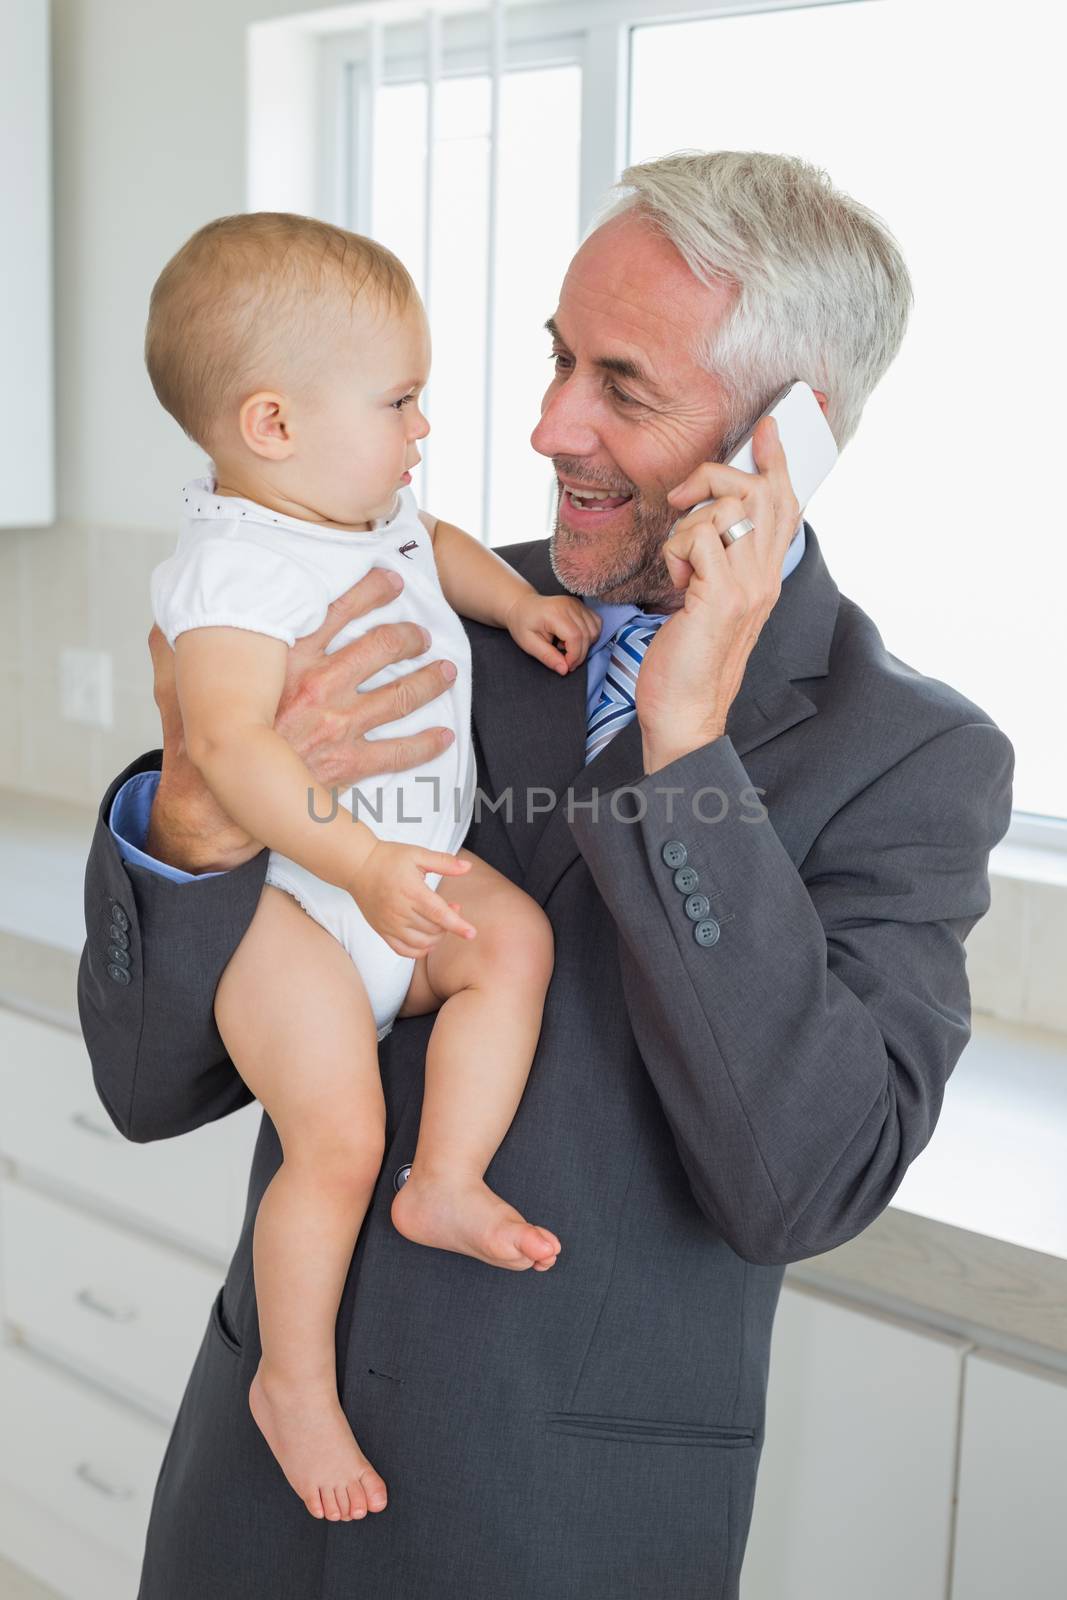 Smiling businessman holding his baby in the morning before work by Wavebreakmedia